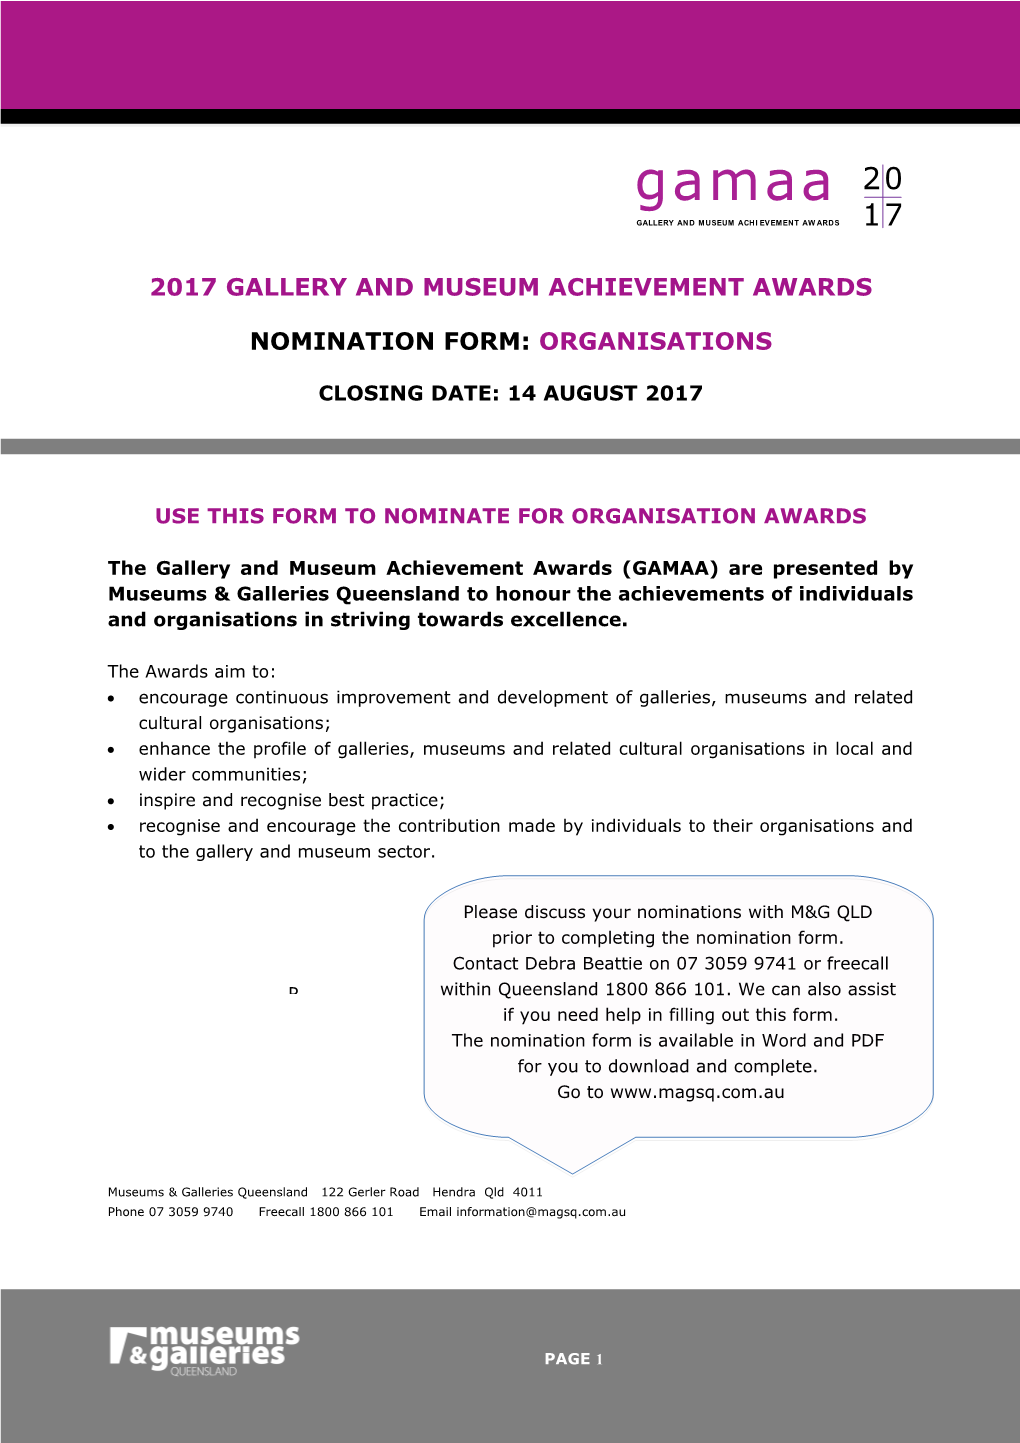 Use This Form to Nominate for Organisation Awards